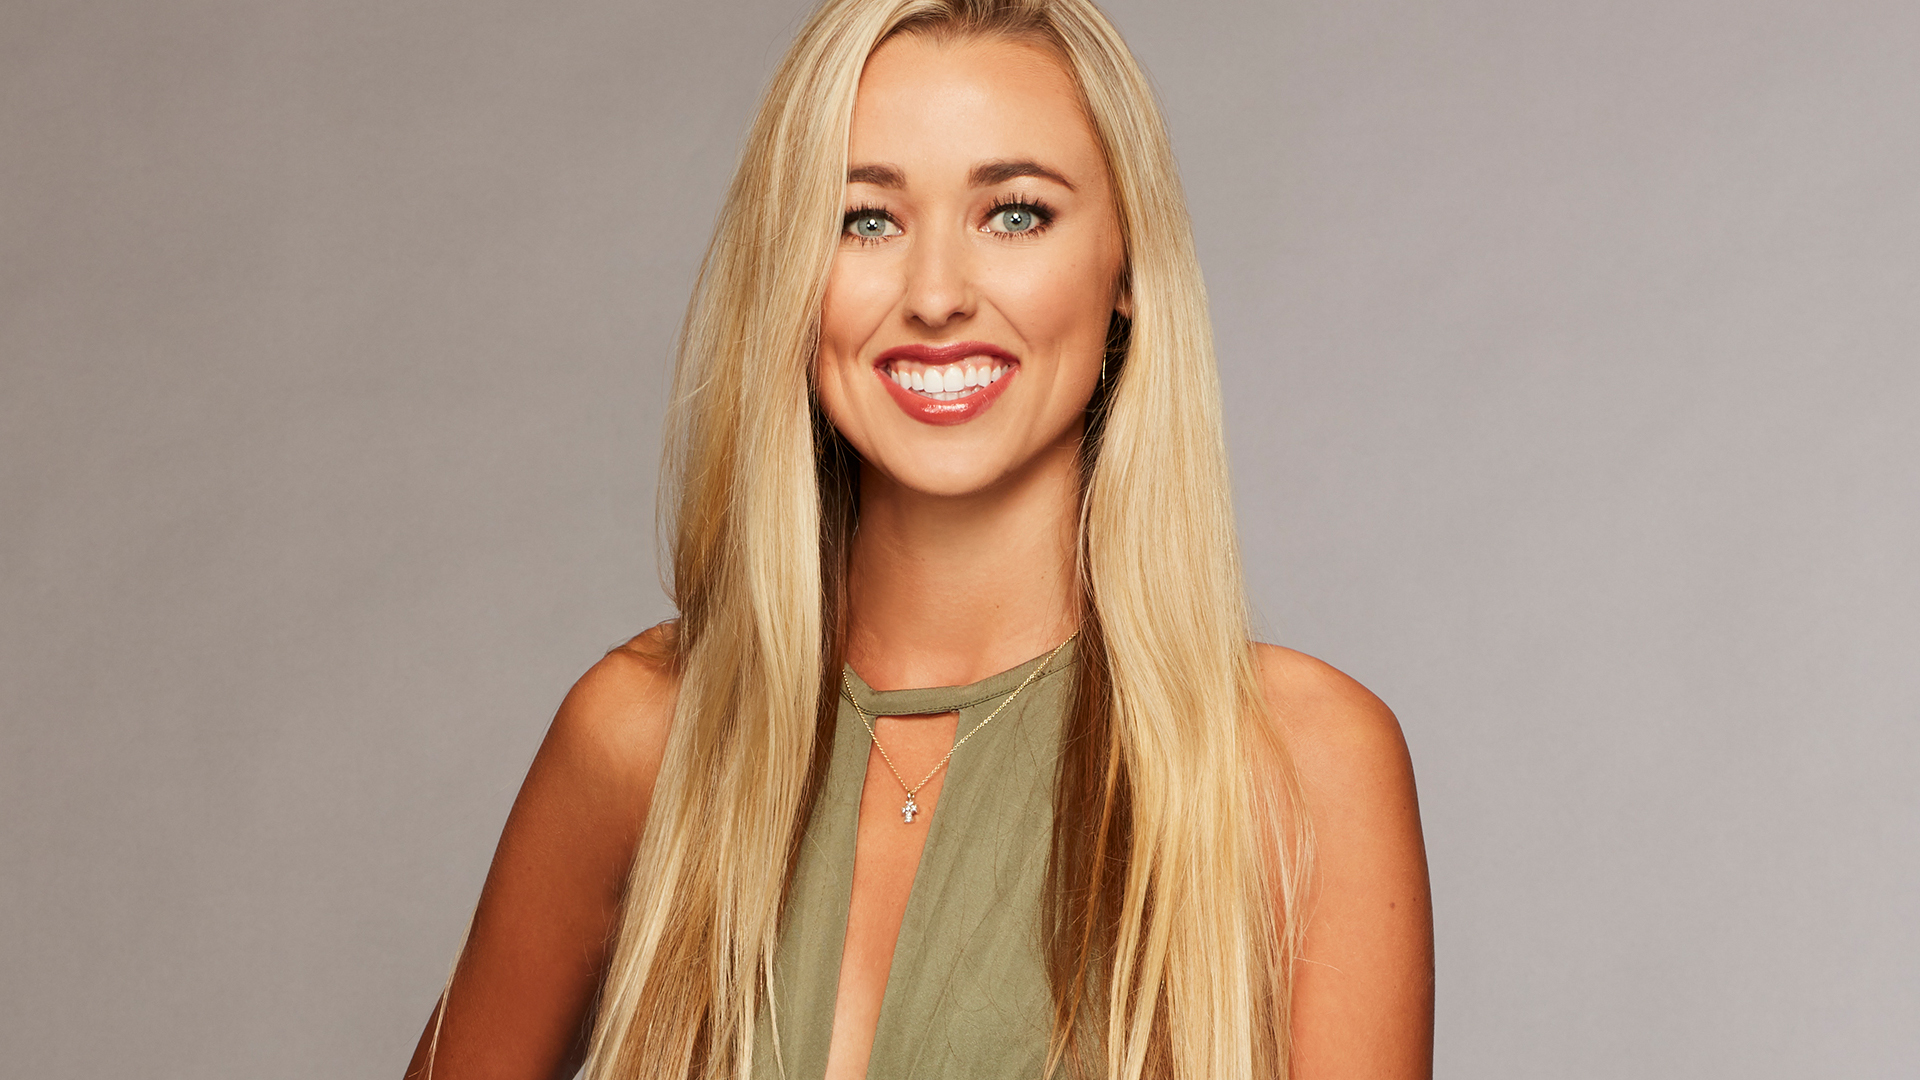 Heather Martin from 'The Bachelor' franchise